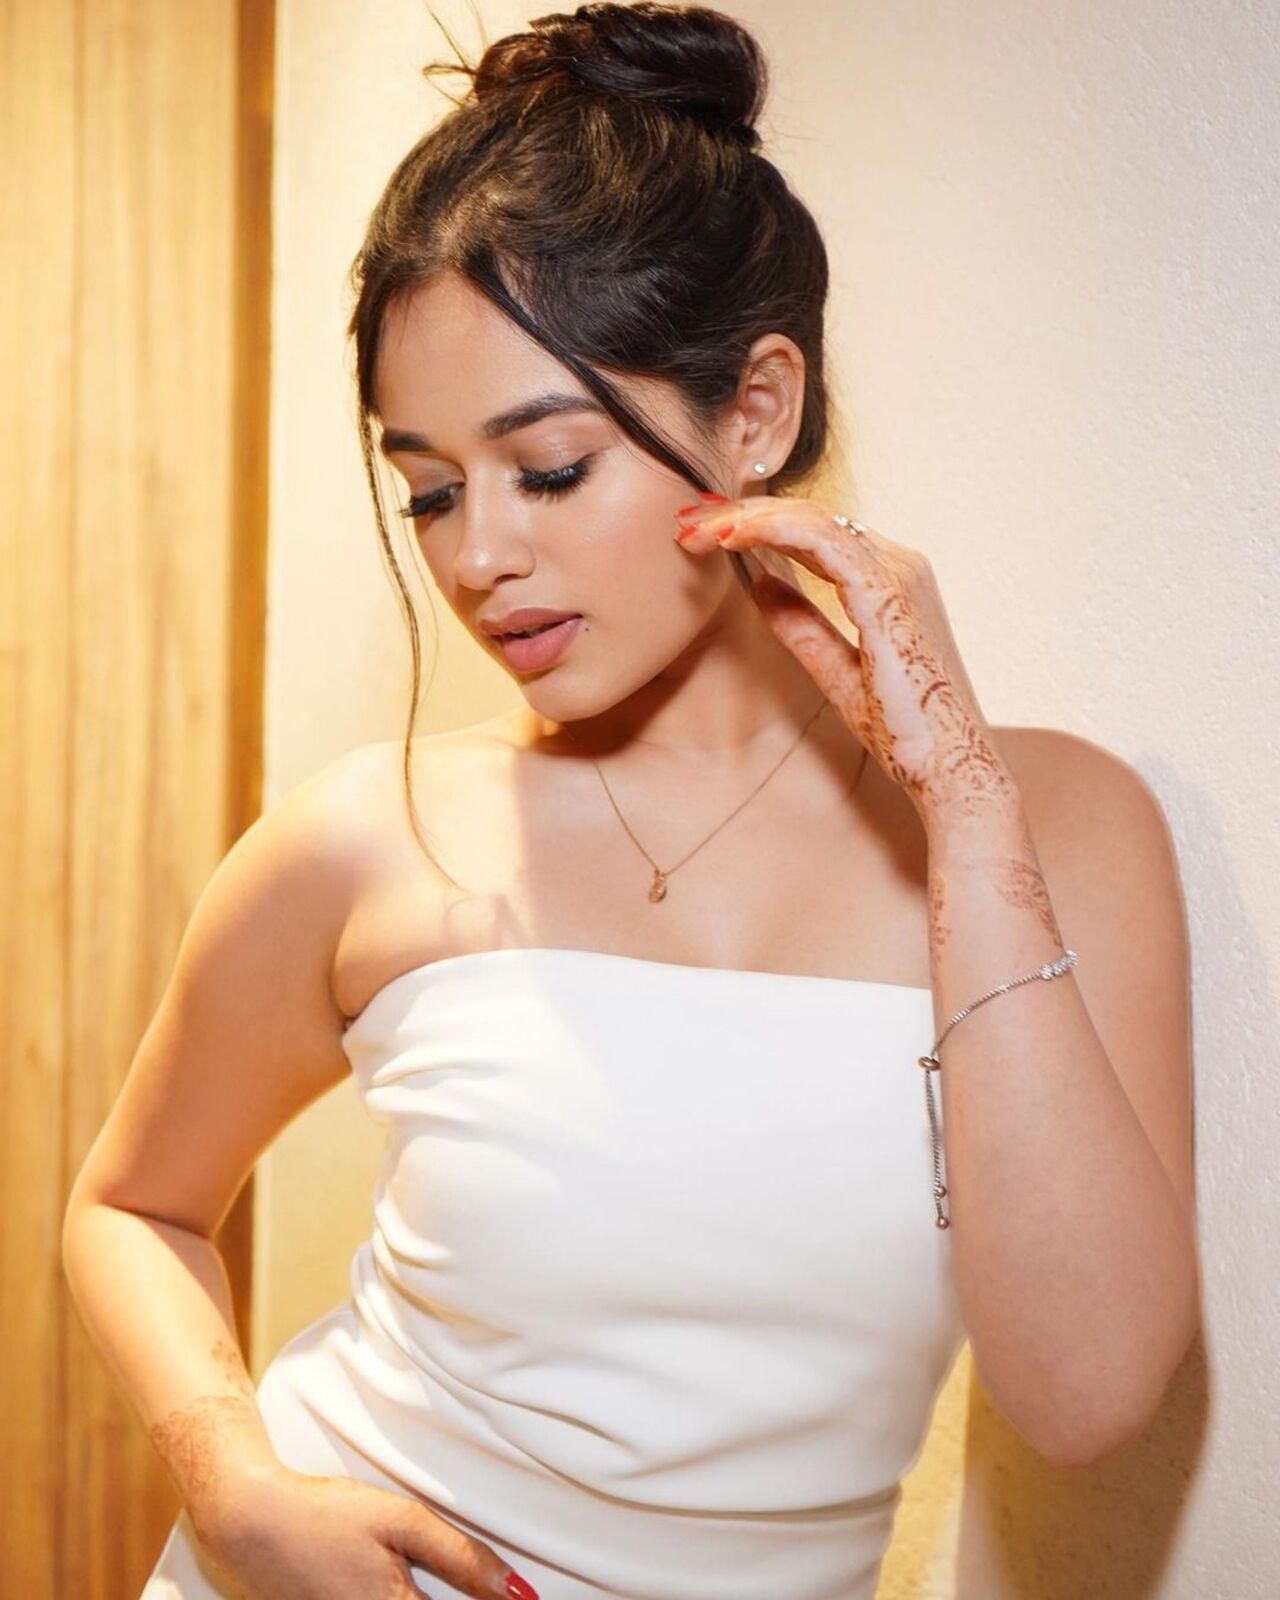 Jannat Zubair chose a timeless white staple dress, accentuated with minimal jewelry. Her hair elegantly tied in a bun